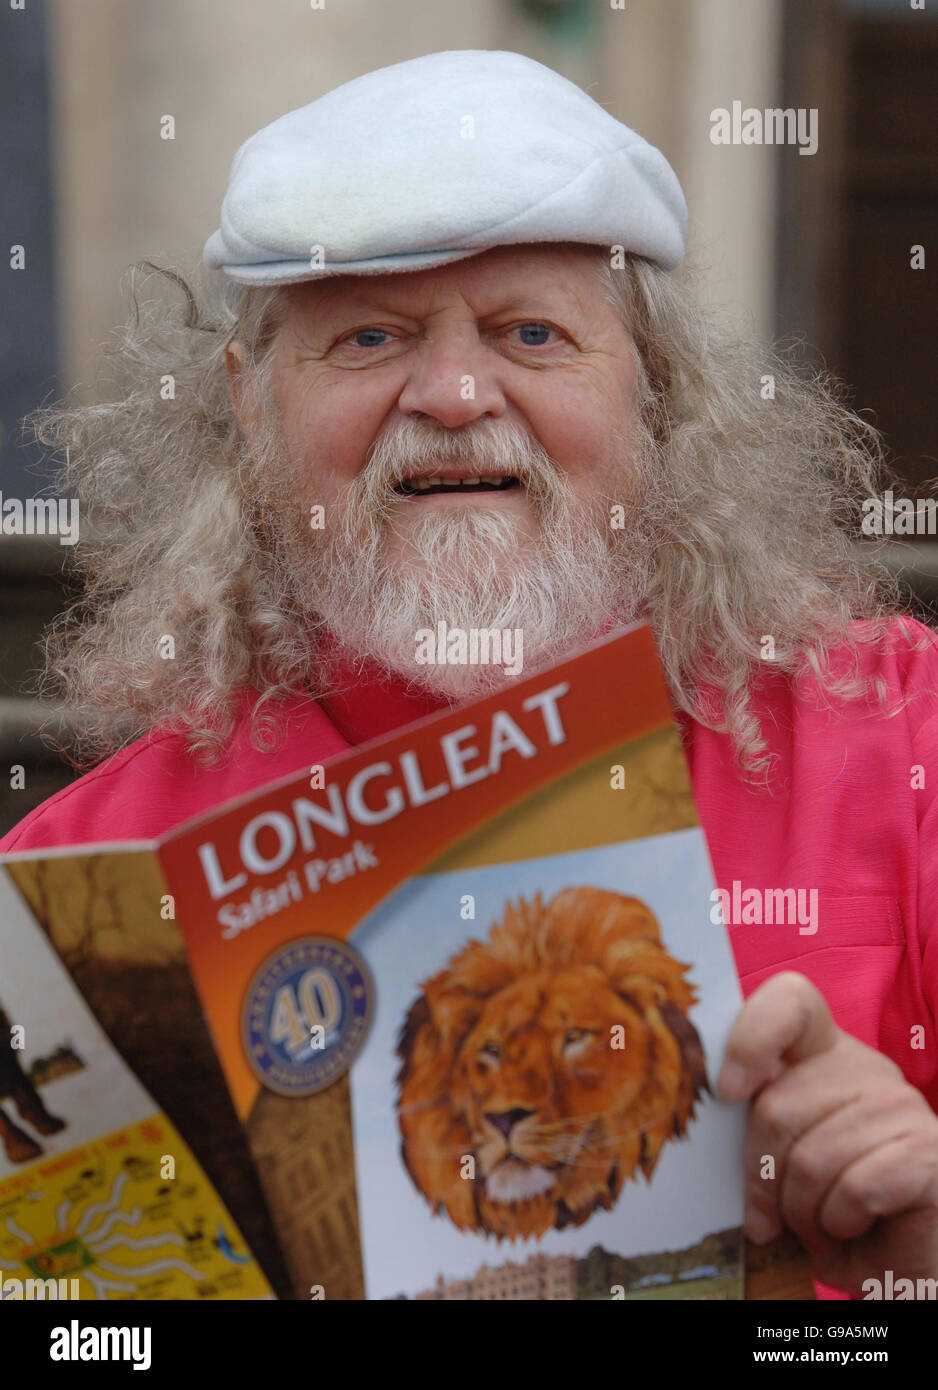 Lord Bath in front of Longleat House, as Longleat Safari Park celebrates its 40th anniversary this year. PRESS ASSOCIATION Photo. Picture Date: Tuesday 11 March 2006. Longleat was one of the first stately homes to open its doors to the public and was also one of the the first places, outside Africa, to open a Safari Park. PRESS ASSOCIATION Photo. Photo credit should read: Barry Batchelor/PA Stock Photo